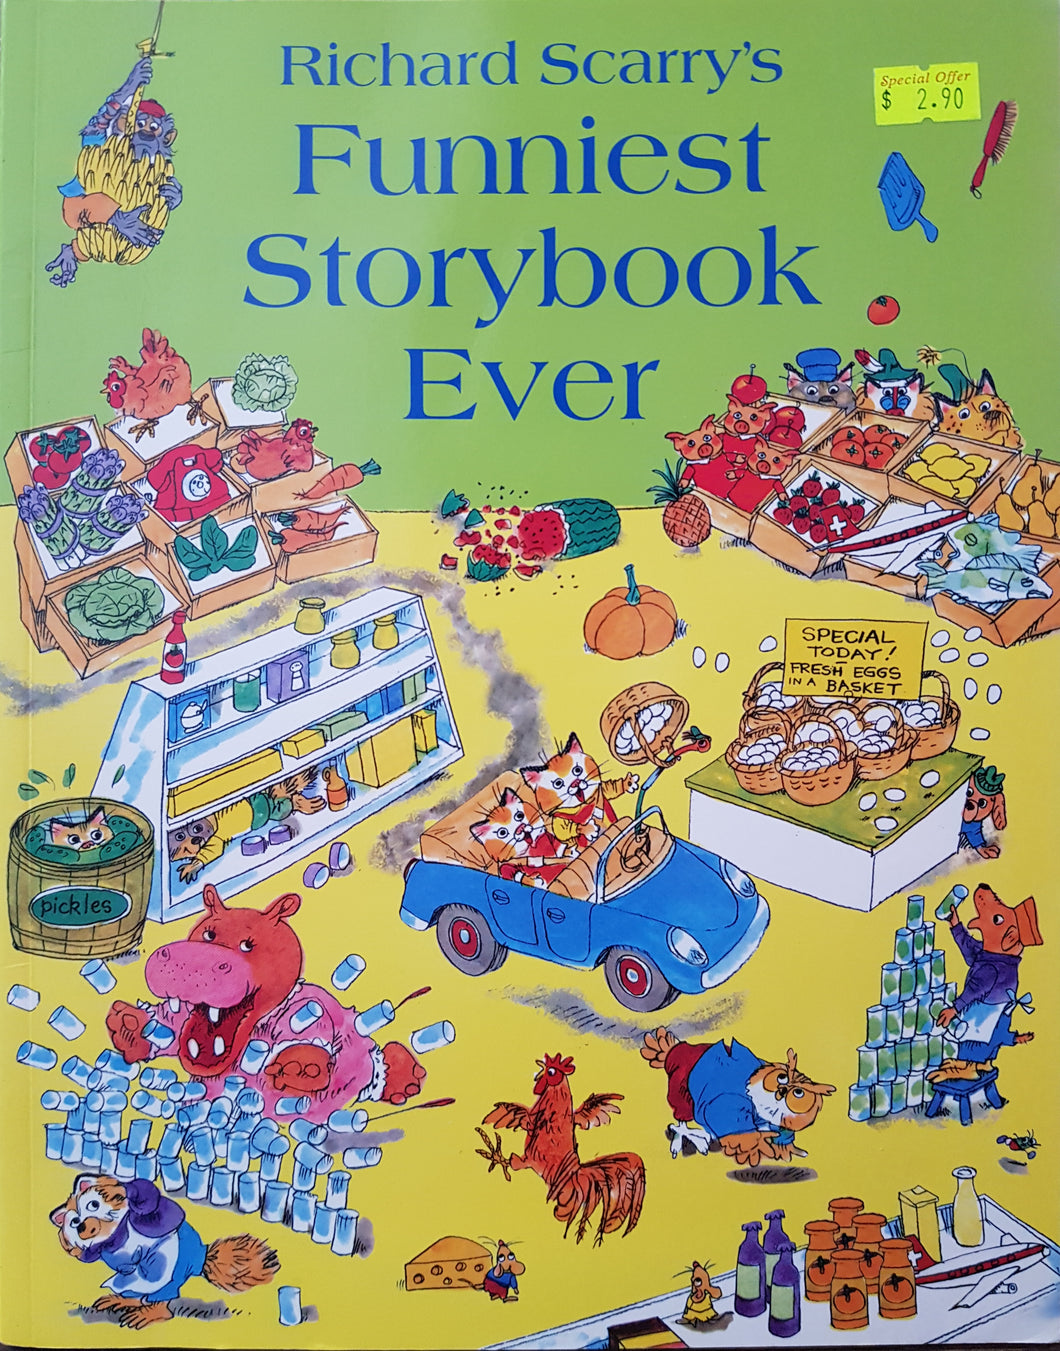 Funniest Storybook Ever - Richard Scarry